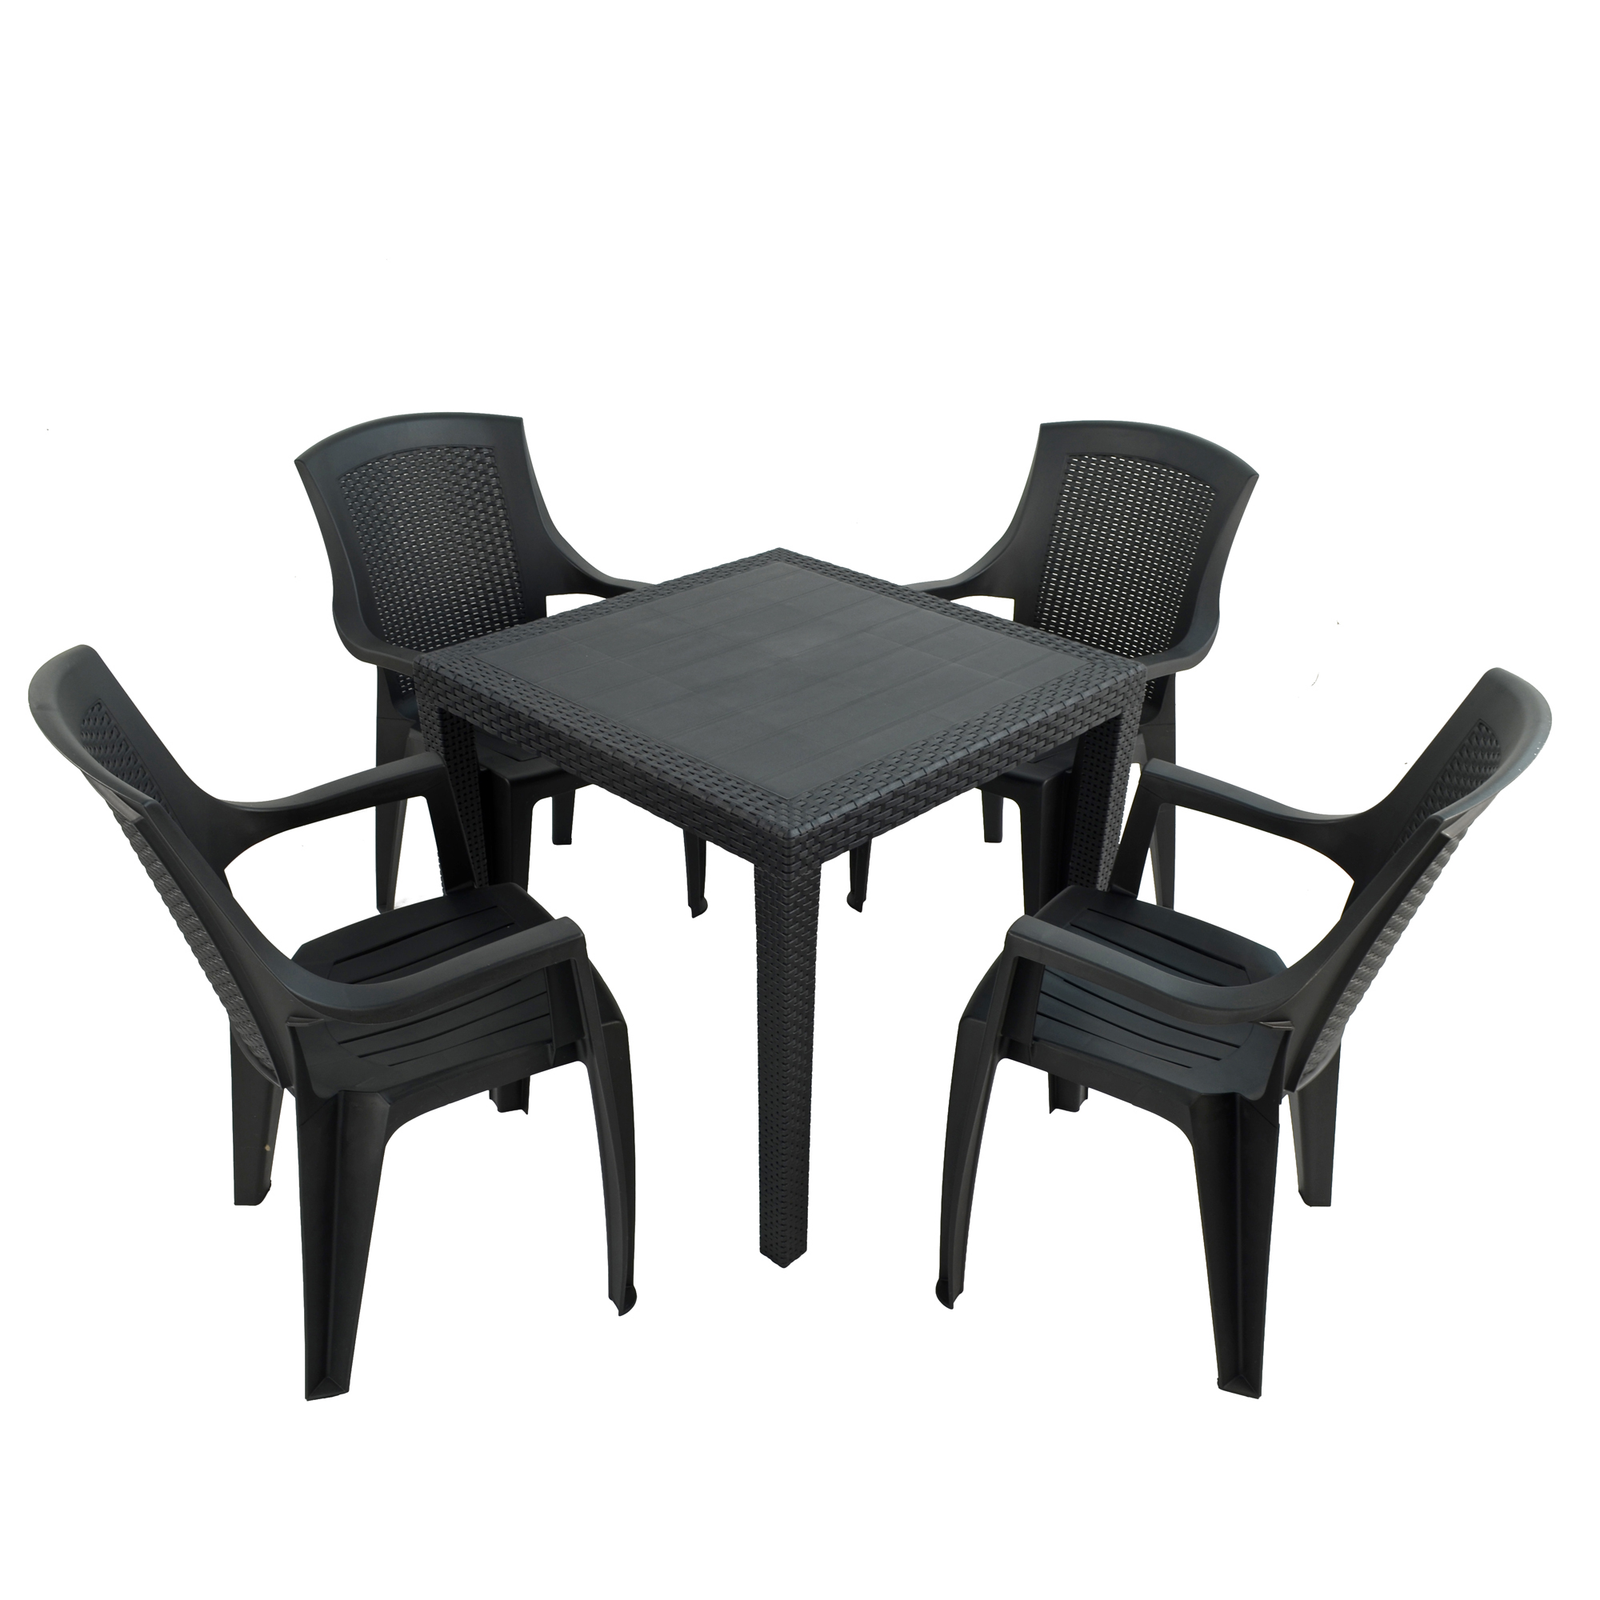 Trabella Salerno Square With 4 Sedini Chairs Set Anthracite Grey Dining Sets Trabella   